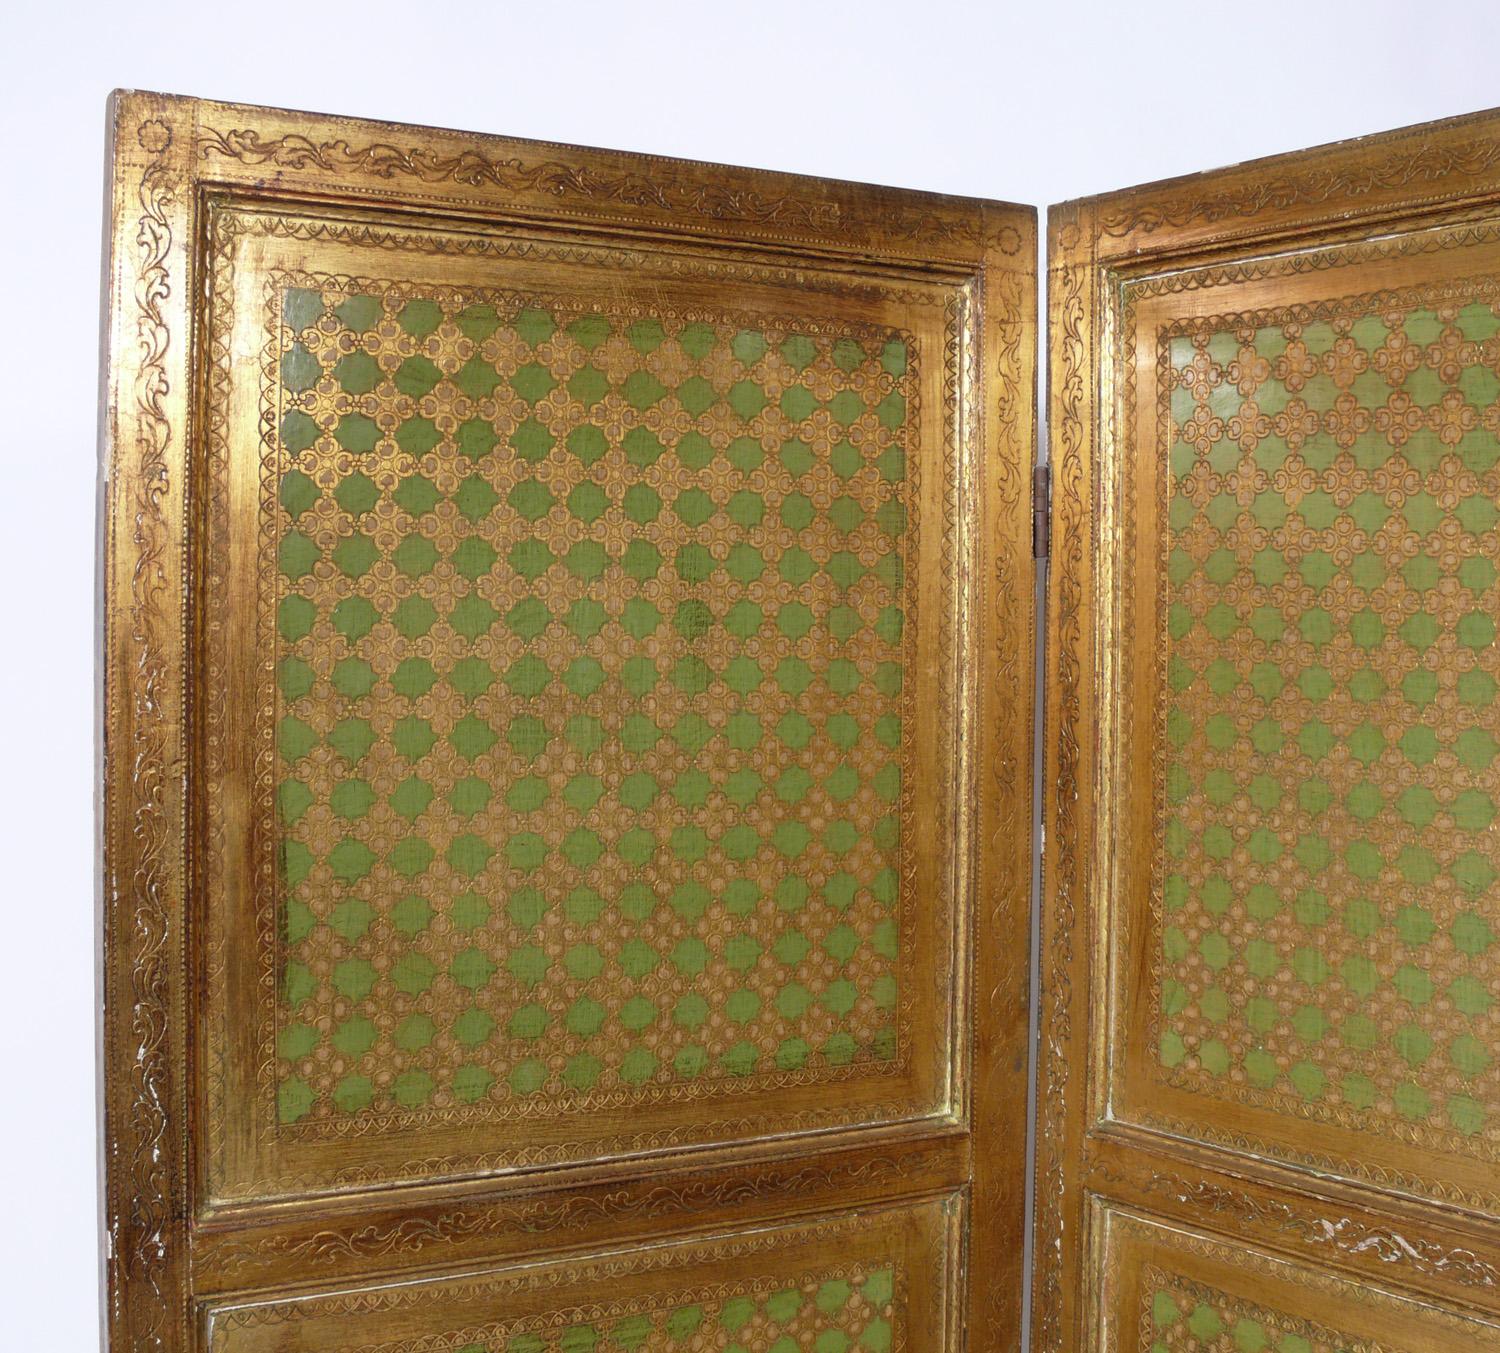 Gilt Italian Florentine folding screen or room divider, Italy, circa 1950s. We have also seen designers use these as headboards and they look great as well.